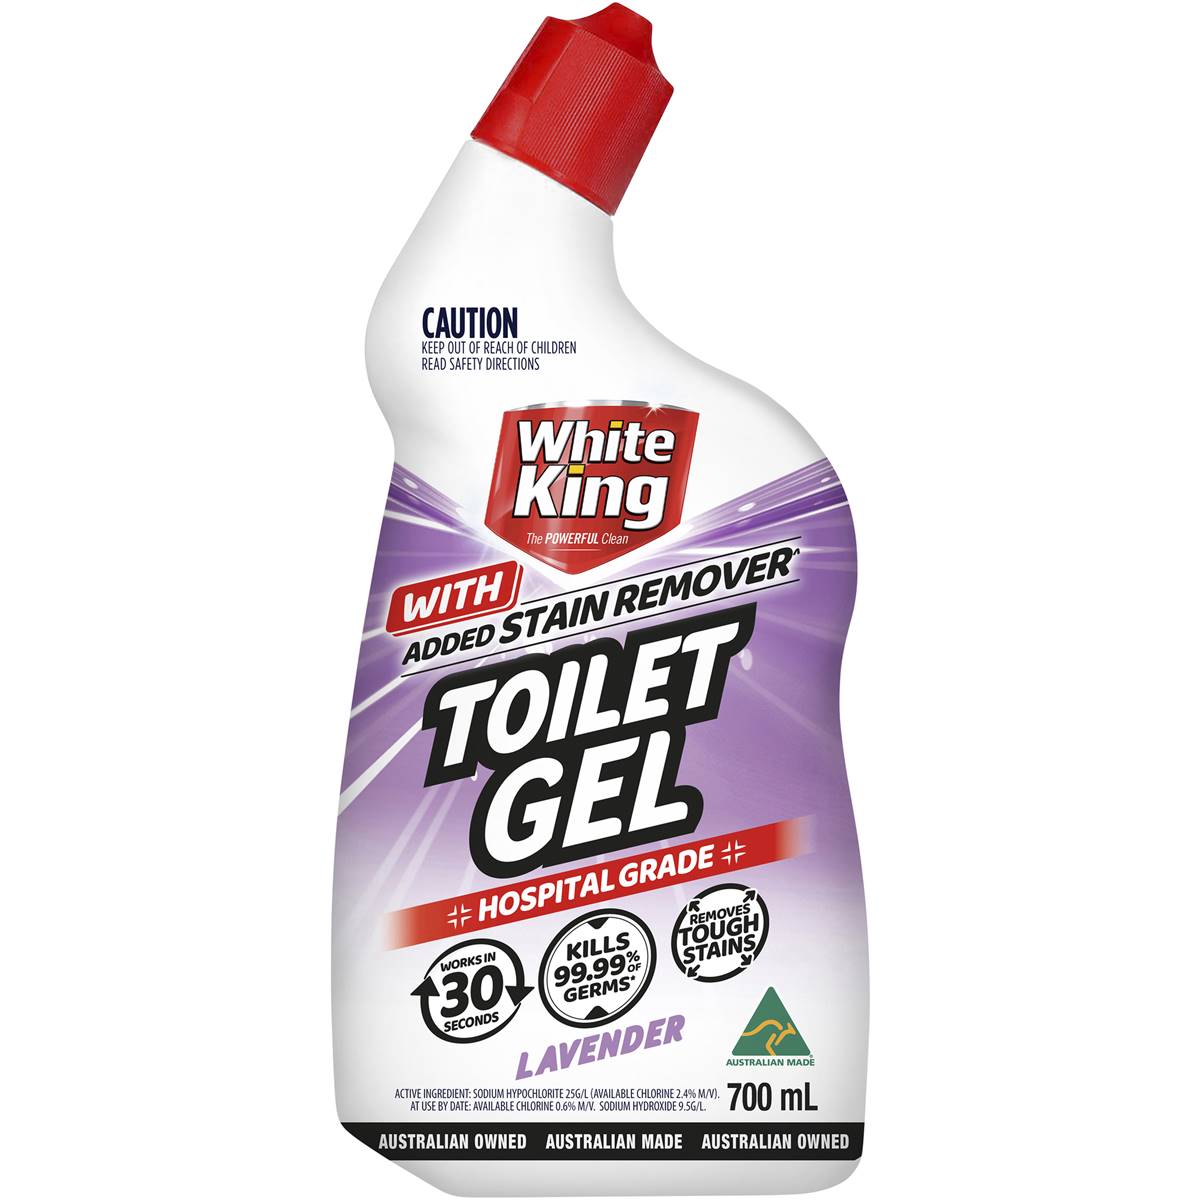 White King Toilet Gel With Added Stain Remover Lavender 700ml